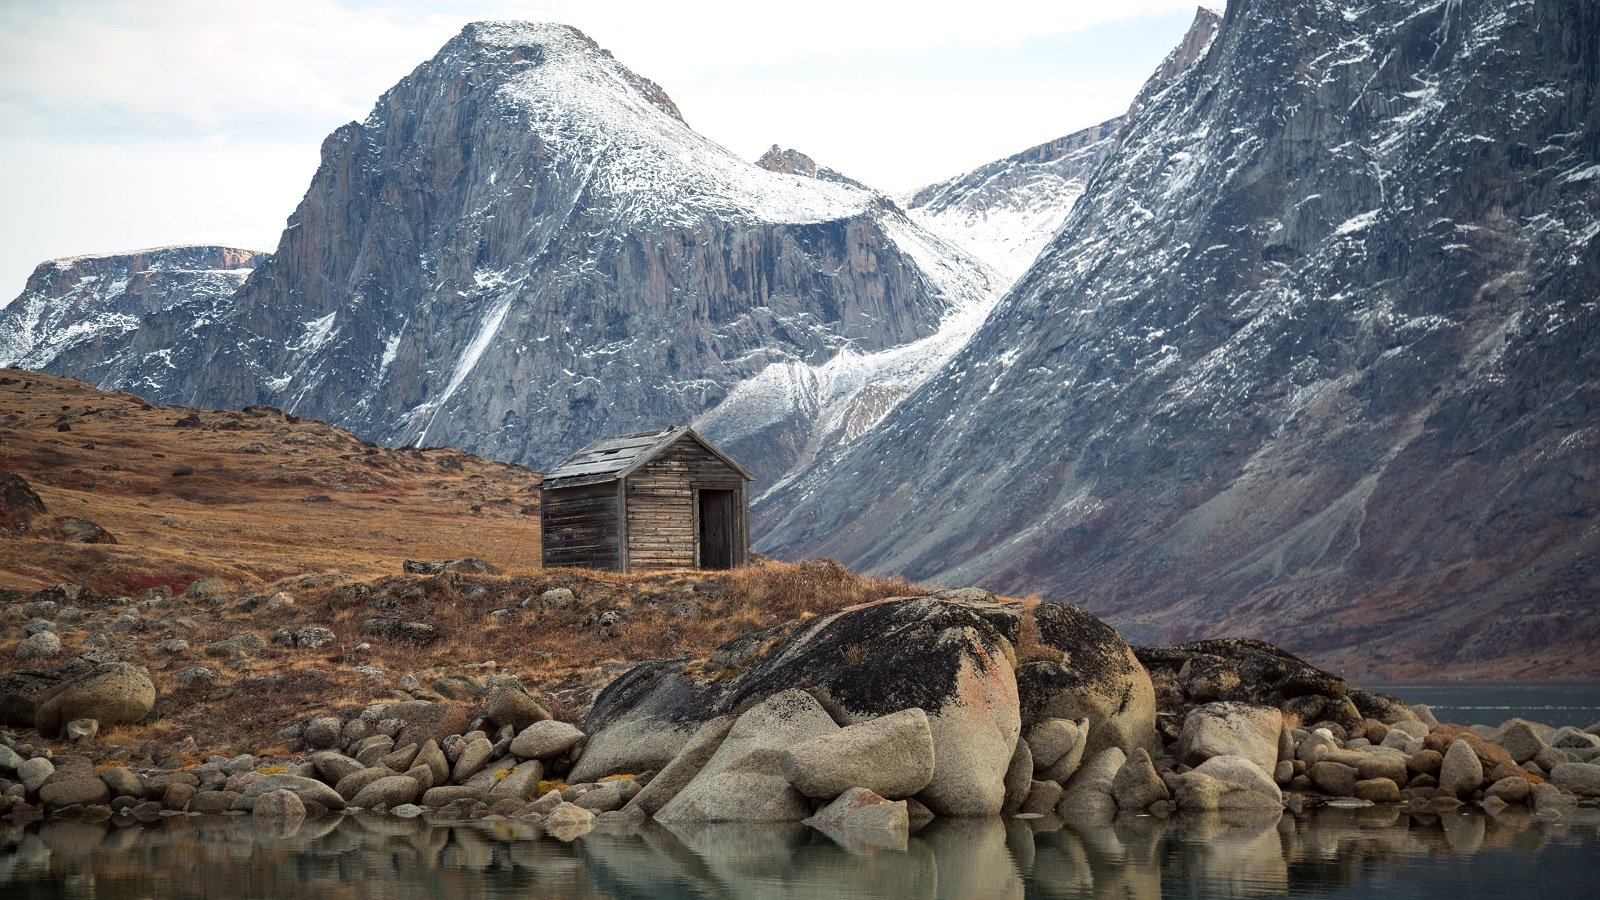 he rugged beauty and the remoteness of Baffin Island